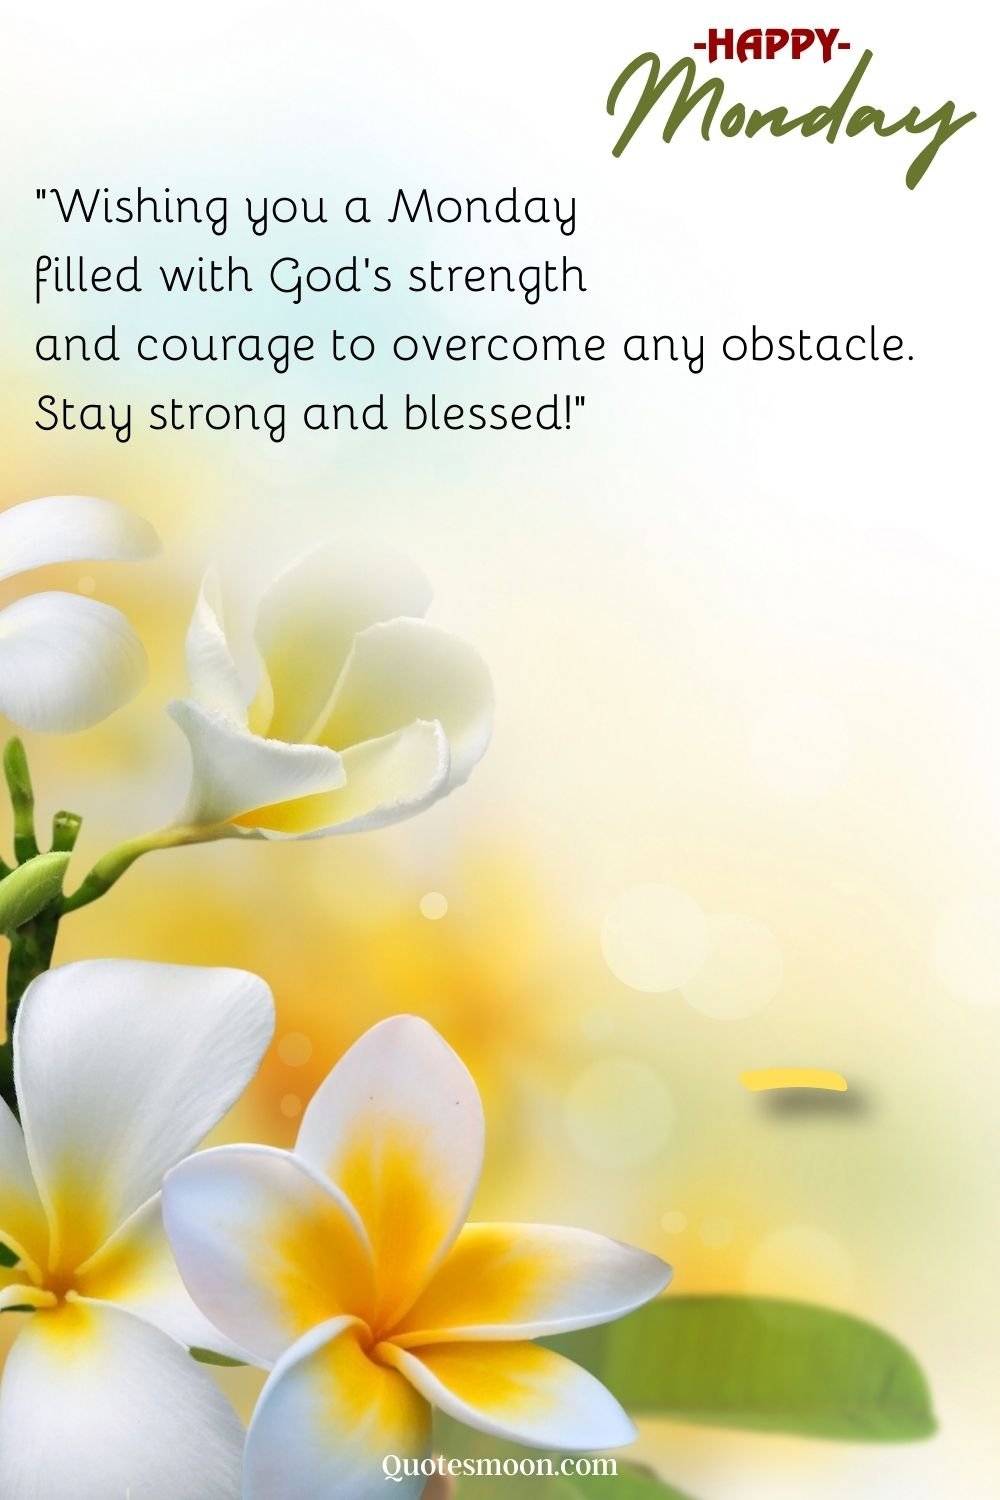 monday morning blessings images HD